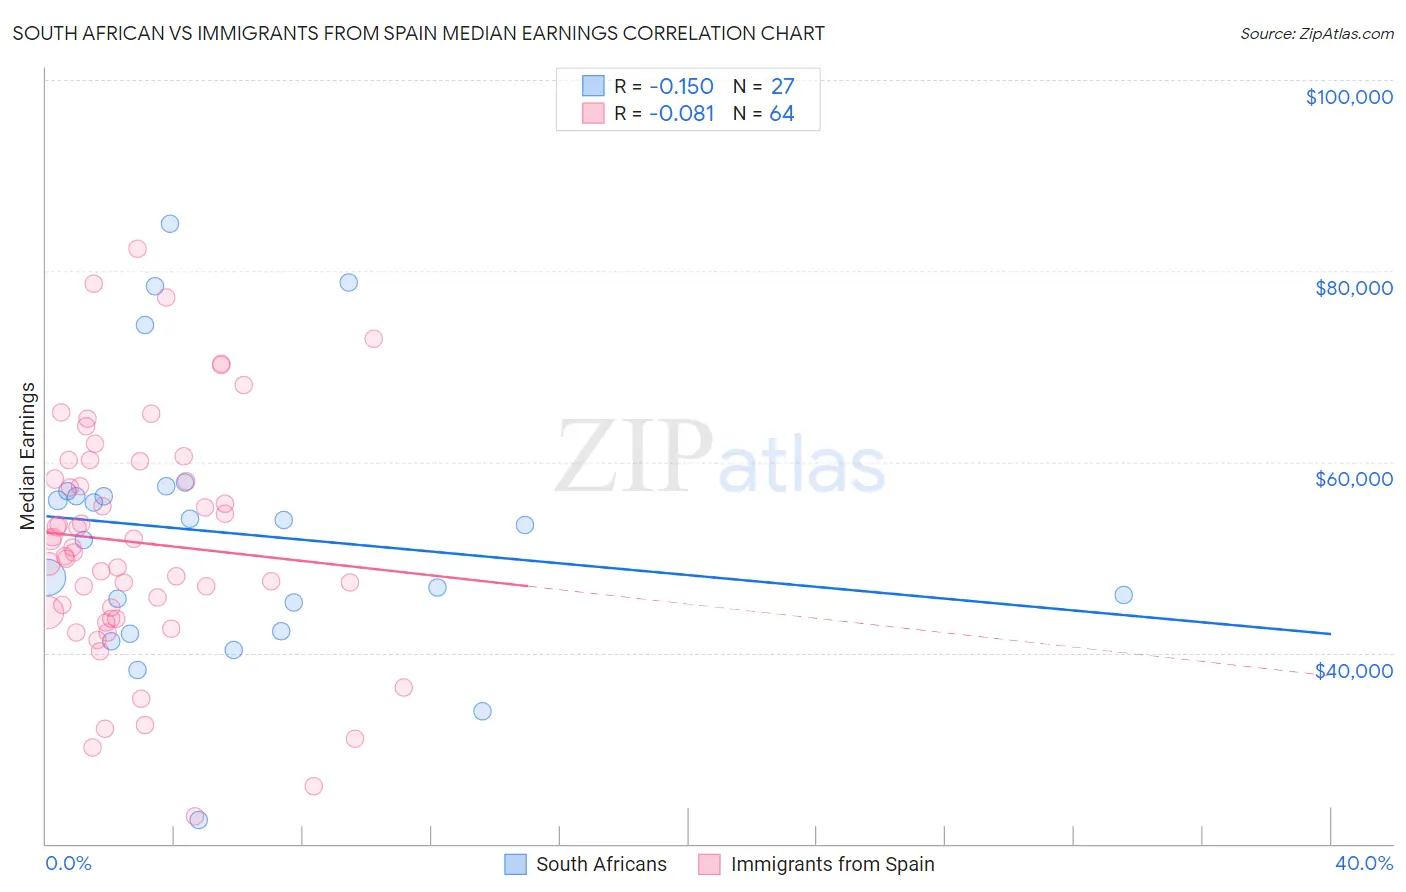 South African vs Immigrants from Spain Median Earnings